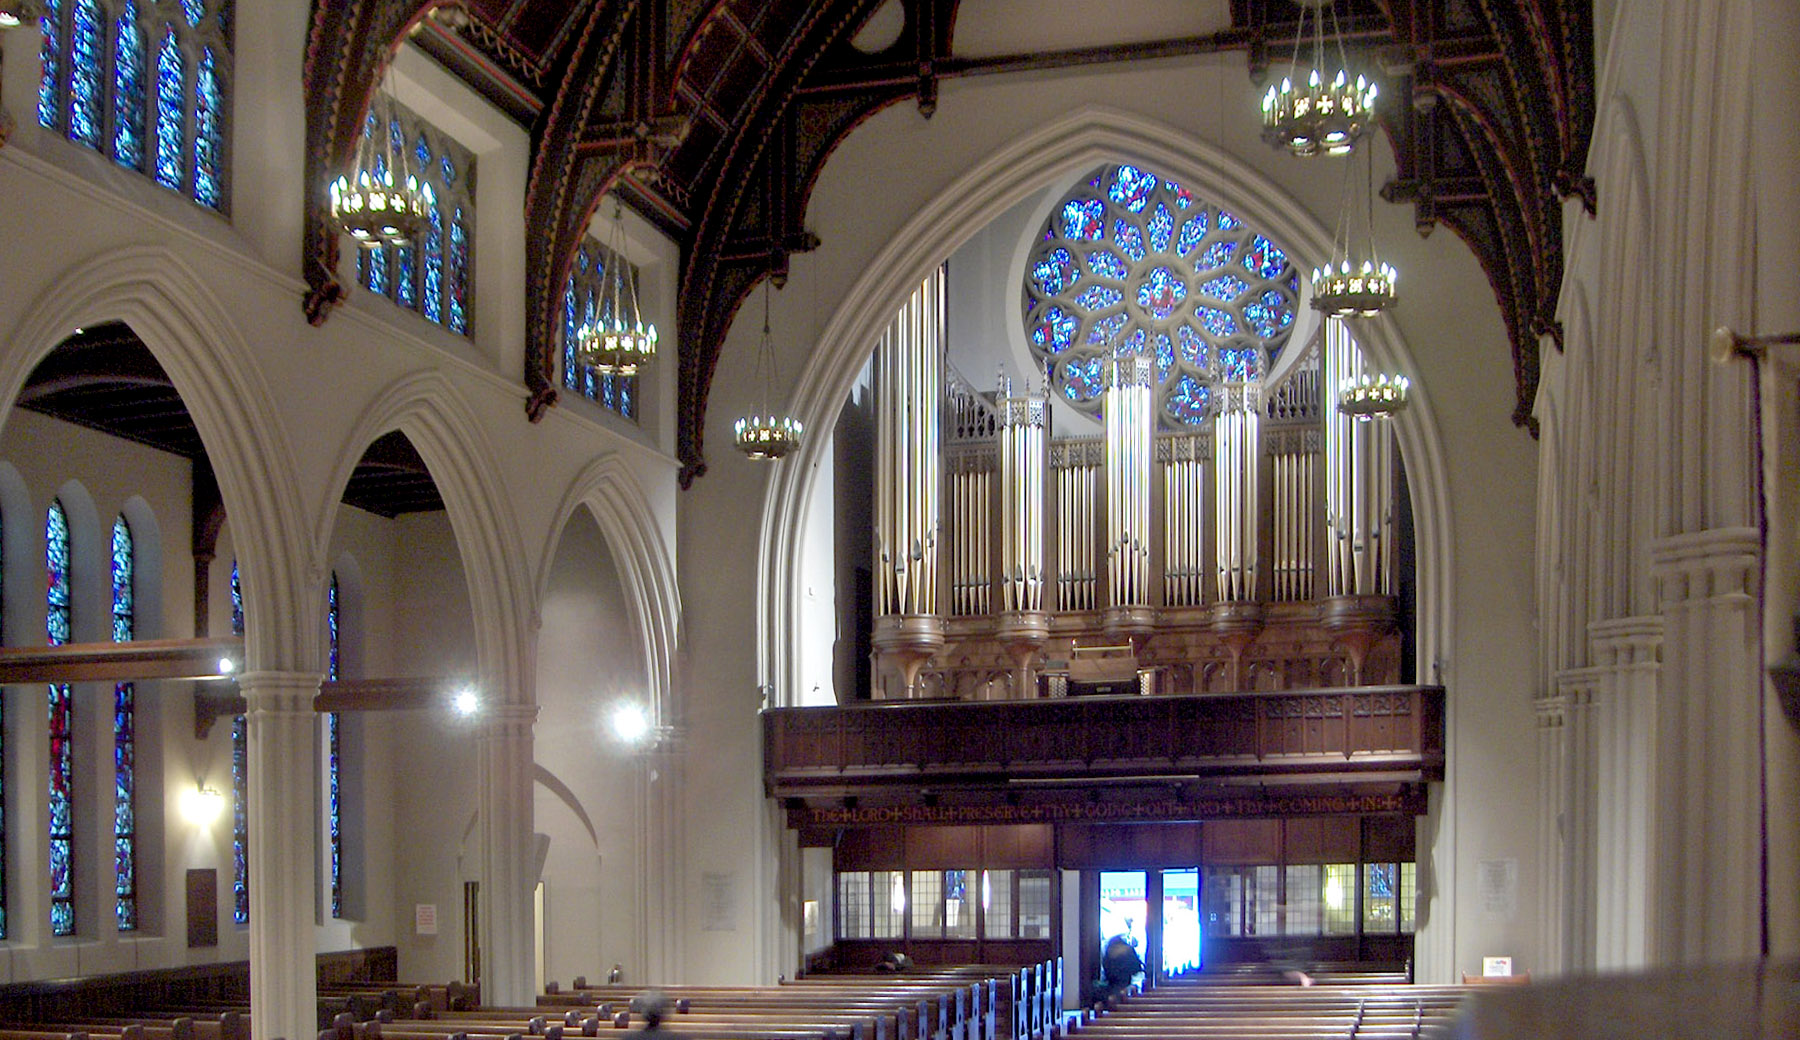 Lothrop Associates assisted St. James Church and Schoenstein & Co. with the restoration of their organ after damage from smoke. The organ was entirely reconstructed.   